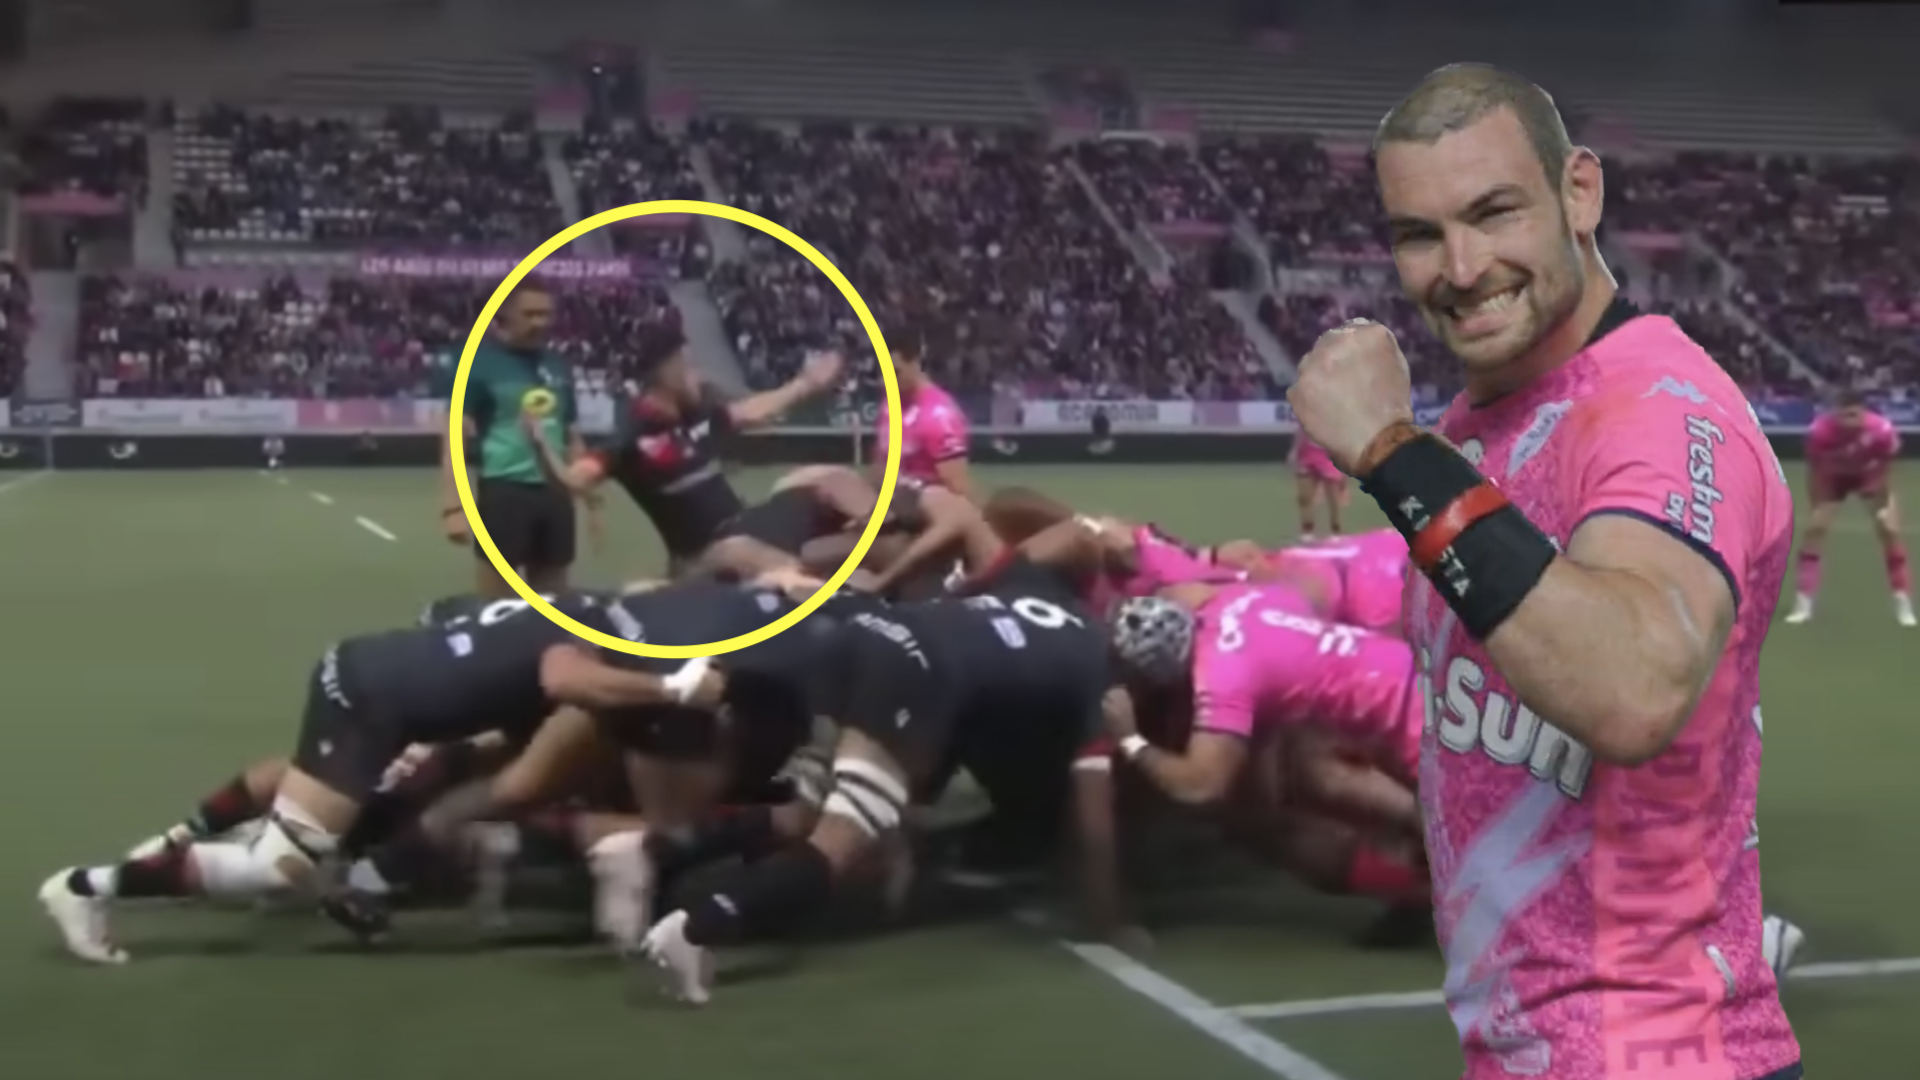 Flanker gets away with ultimate act of gamesmanship right in front of referee